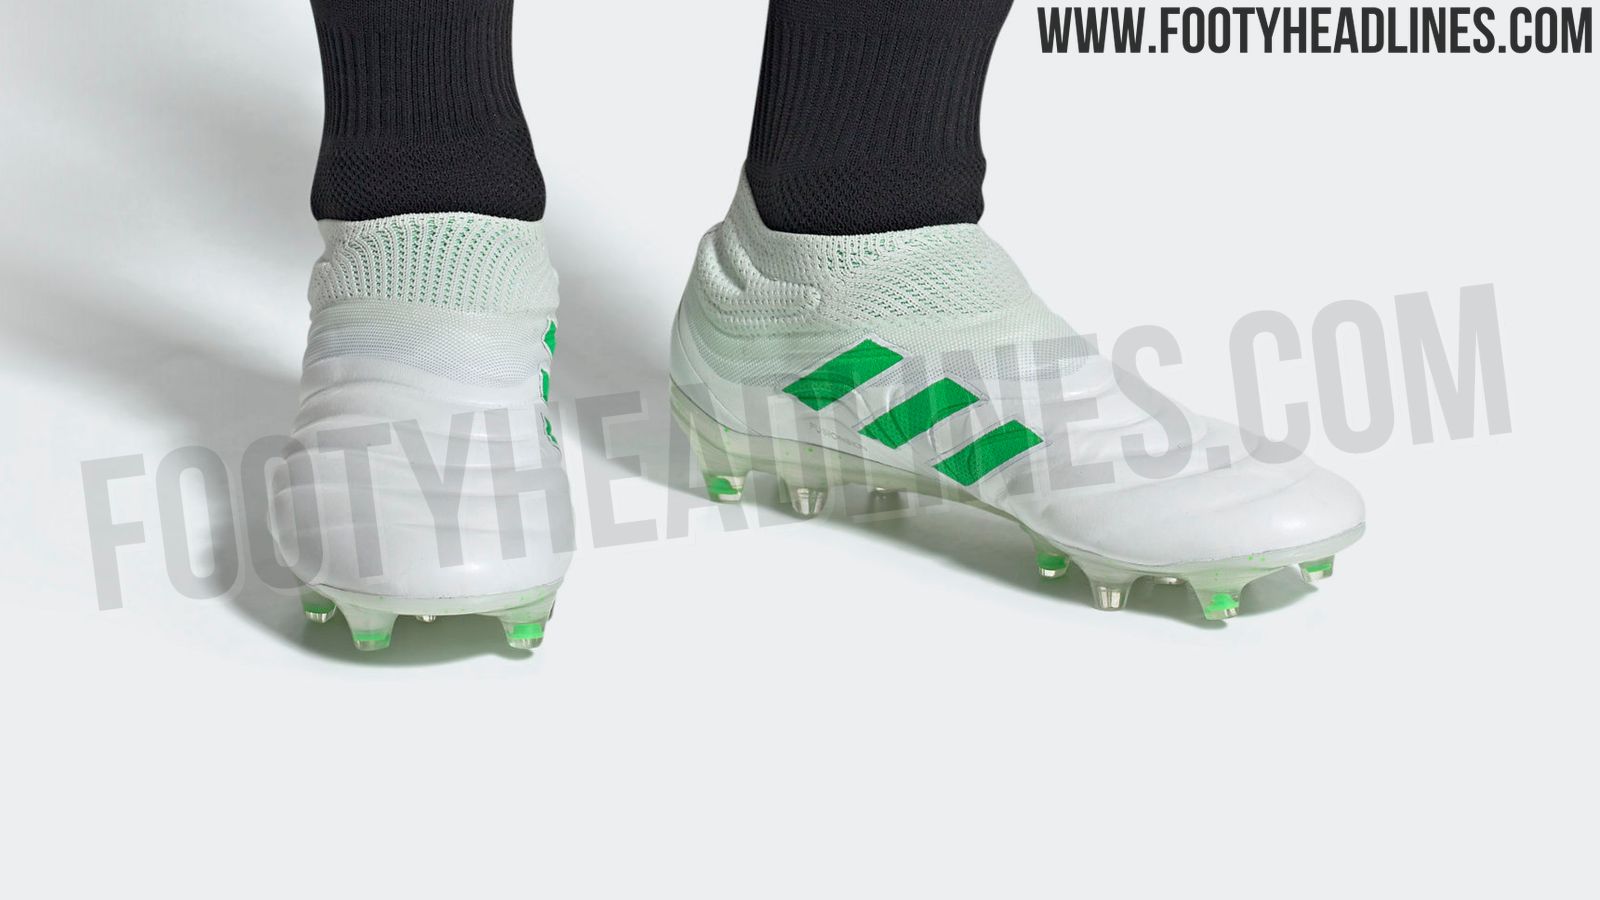 White & Bright Green 19+ 'Virtuso' Boots Leaked Footy Headlines